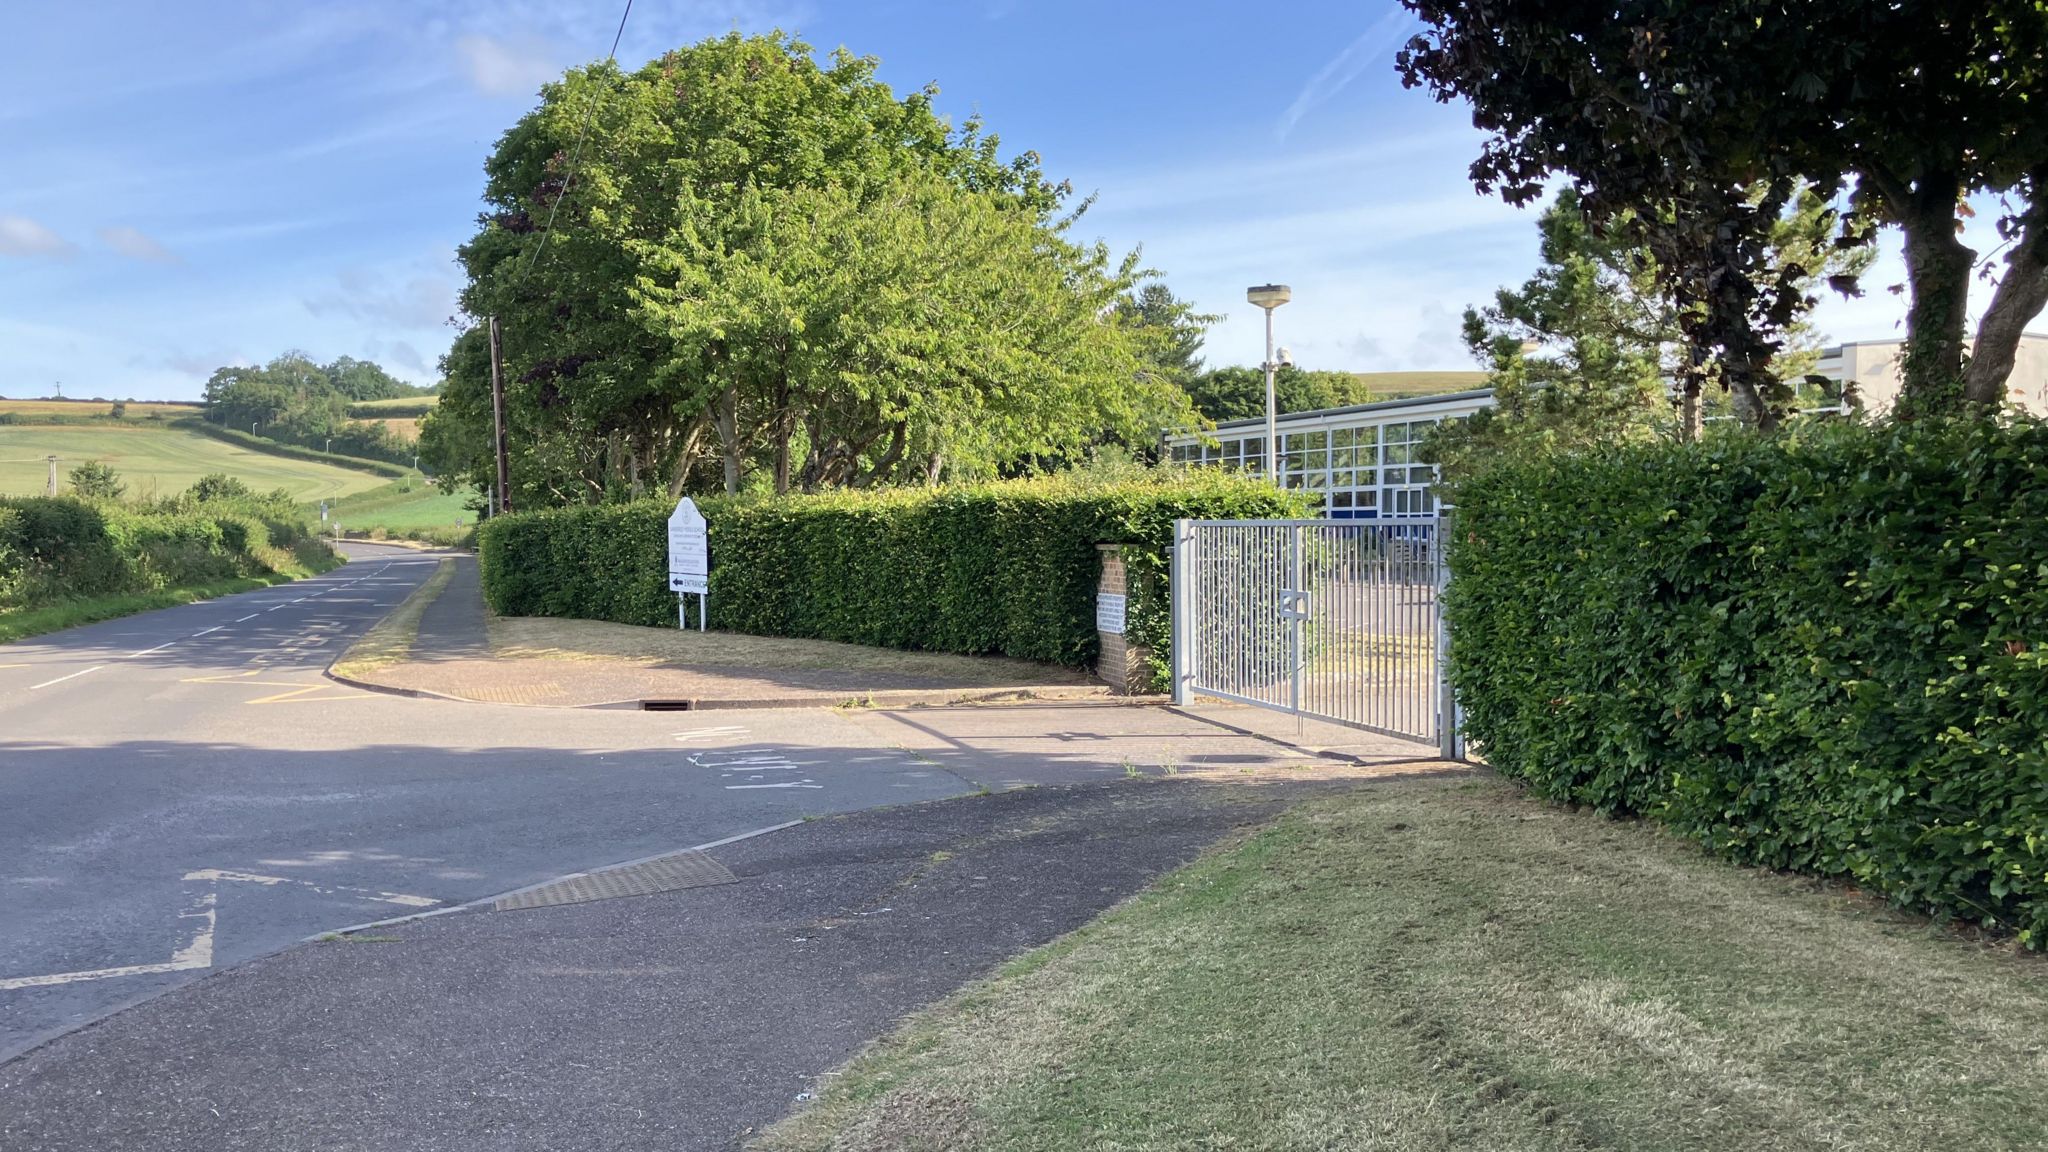 The closed gates of Danesfield Middle School in Williton next to a road, with fields in the background